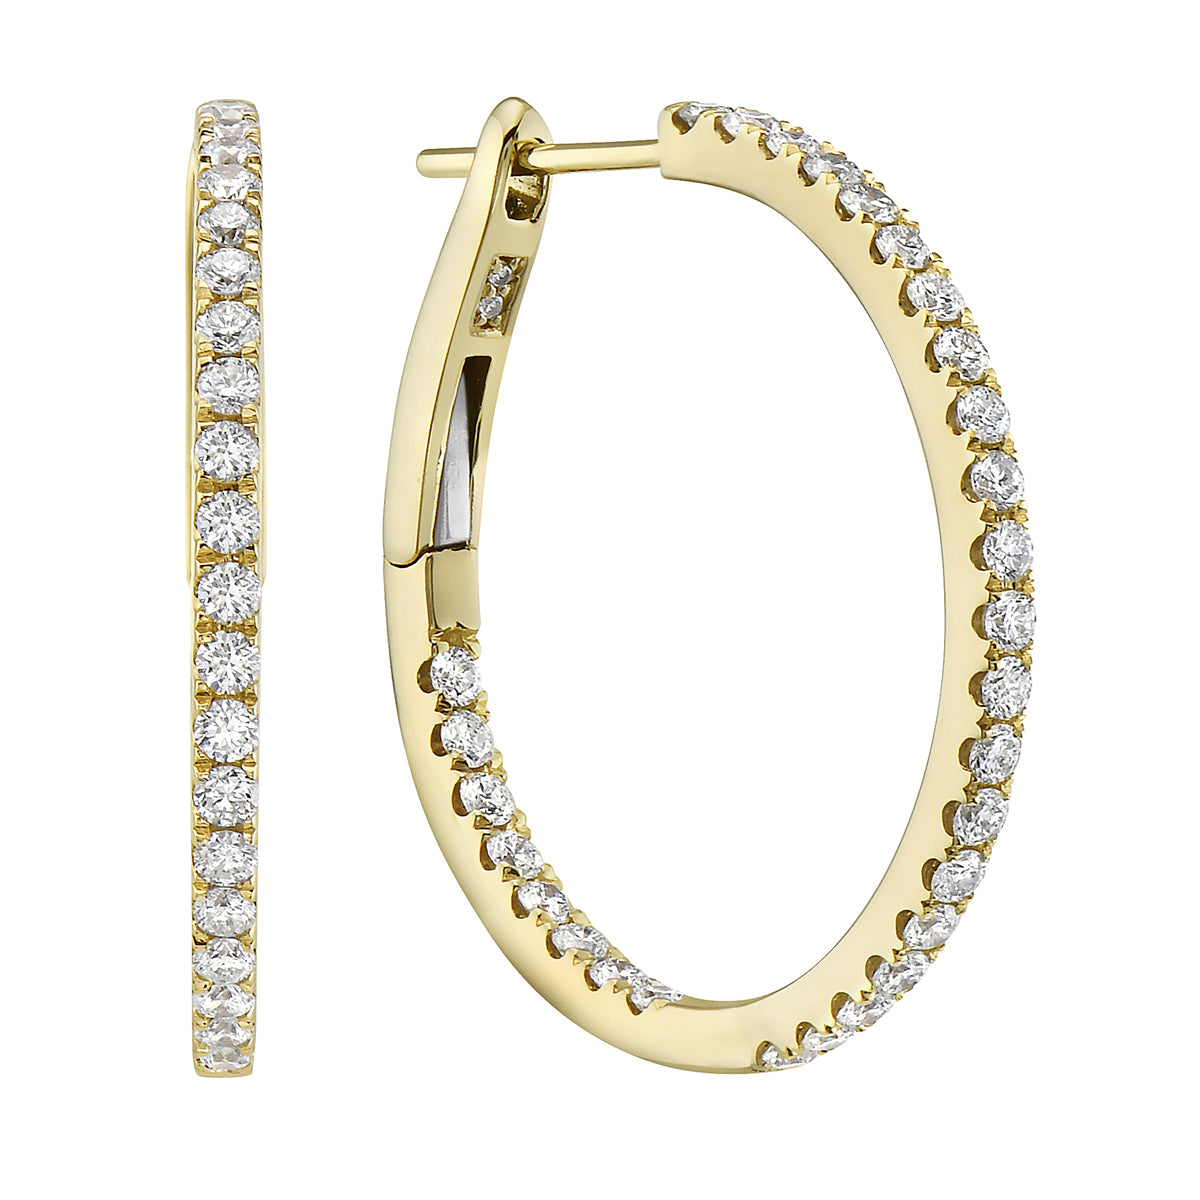 1.0 in Yellow Gold Inside and Out Diamond Hoop Earrings